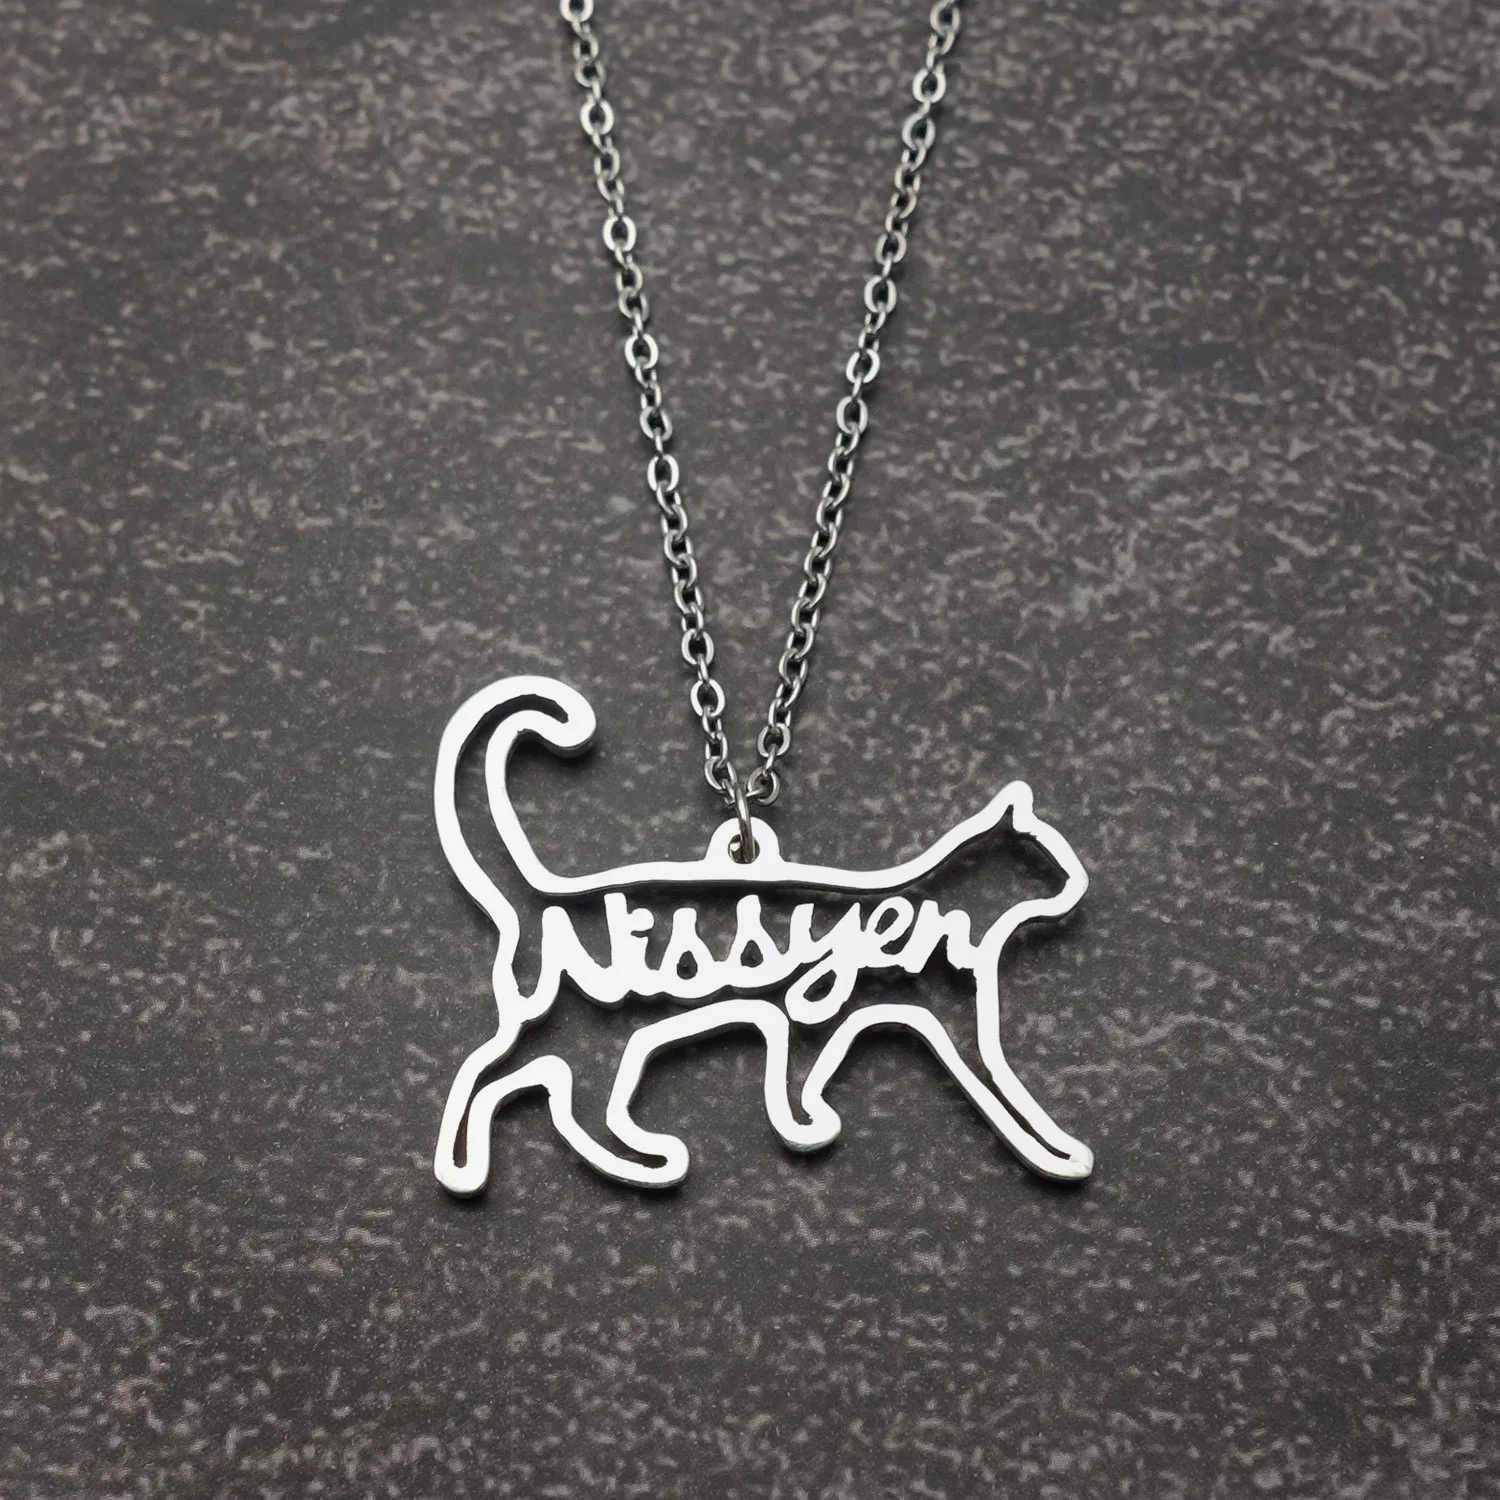 Personalized Name Necklace Cat Shape Pendant Necklace Customized Jewelry With Name Animal Memorial Gift for Women Girls Mother